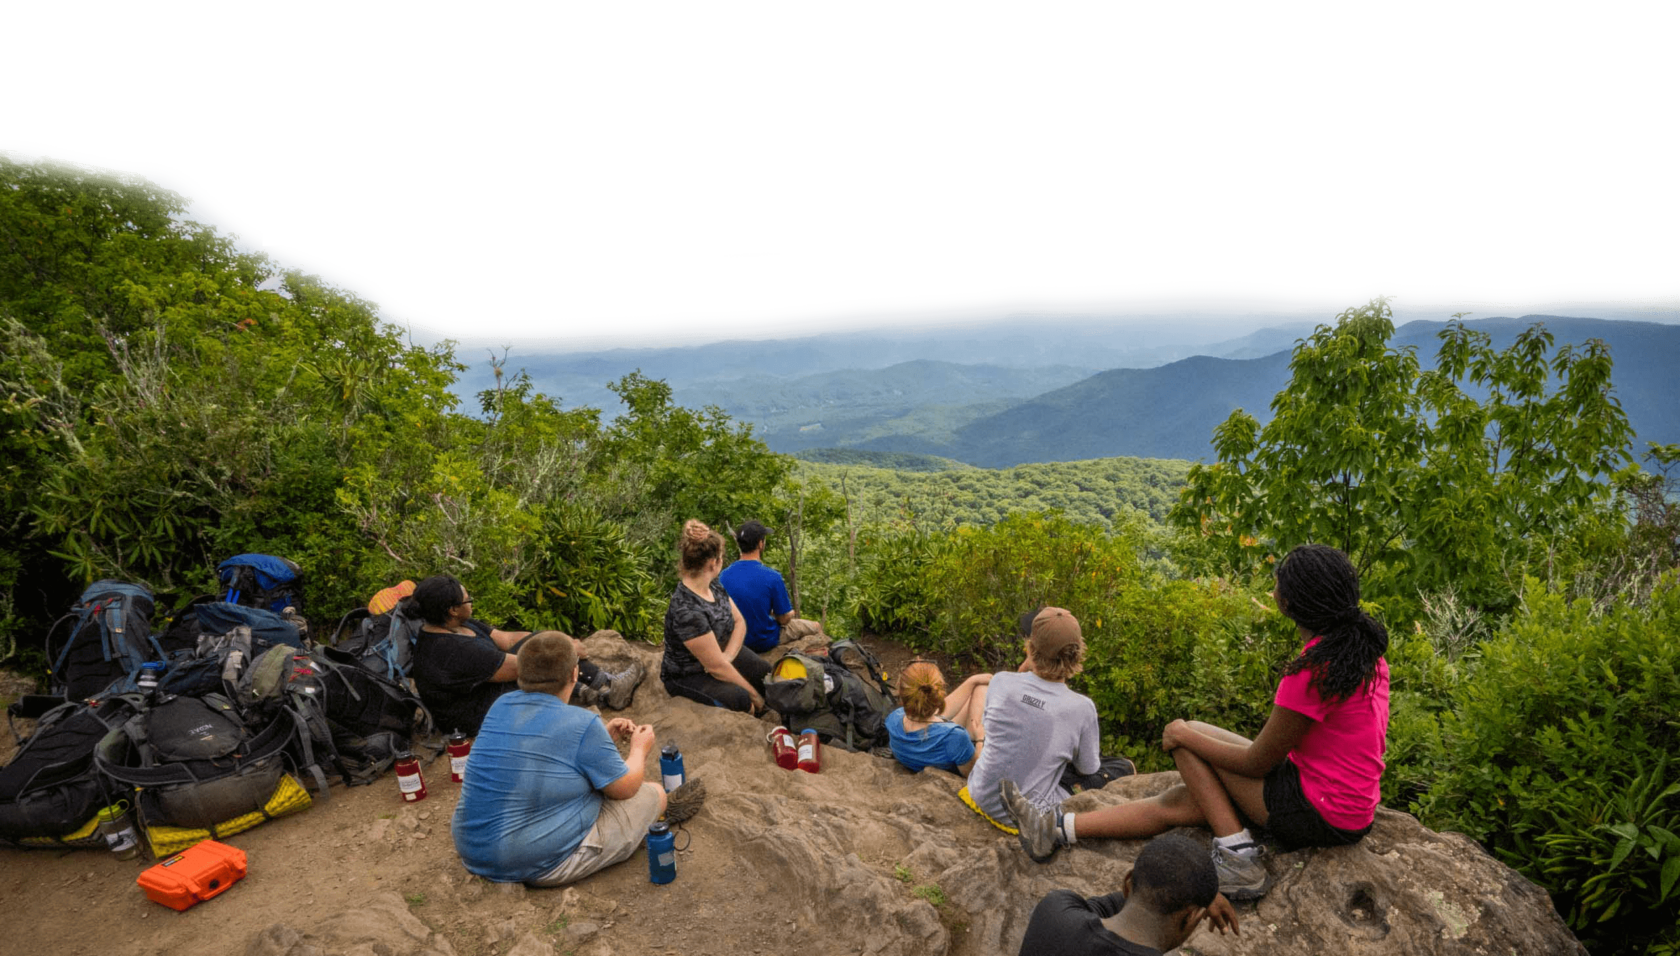 A group of teenagers sitting and enjoying a view of mountains.